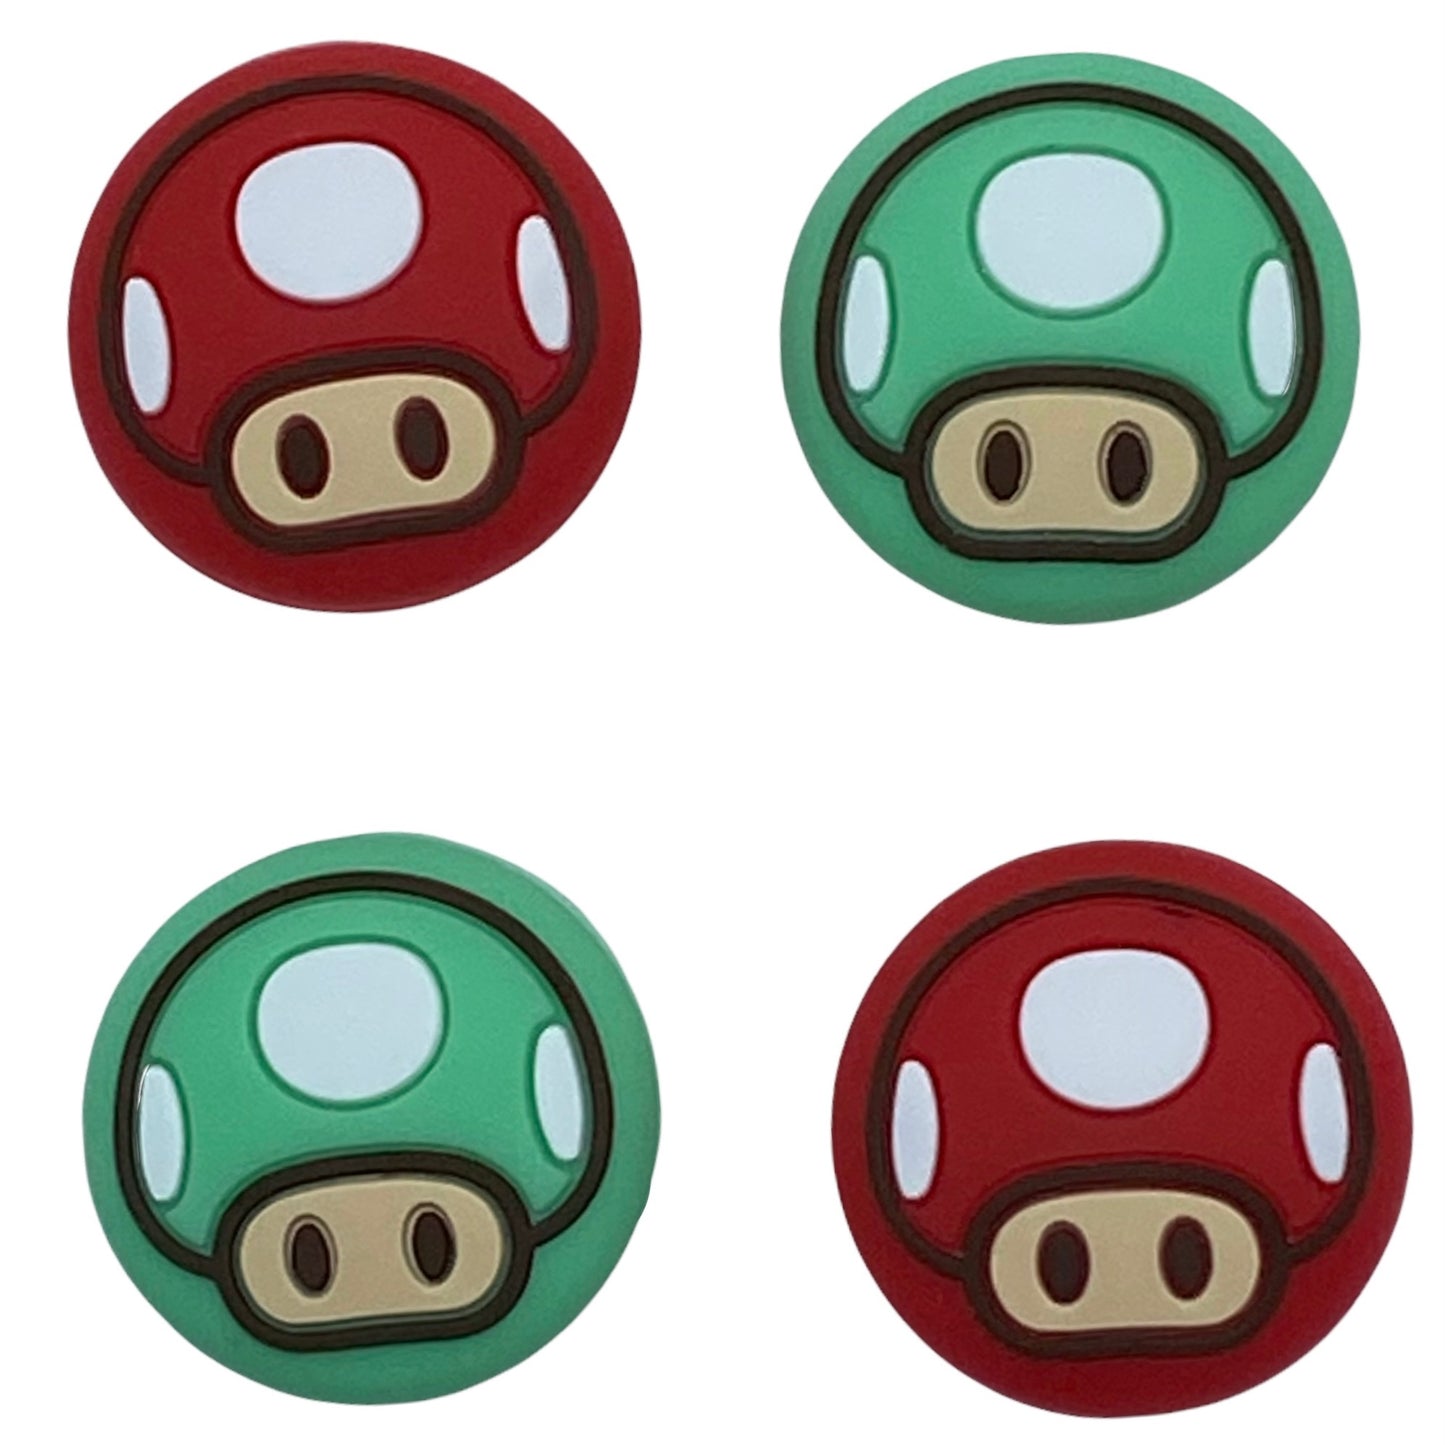 JenDore Green Red 4Pcs Mushroom Silicone Thumb Grip Caps for Nintendo Switch